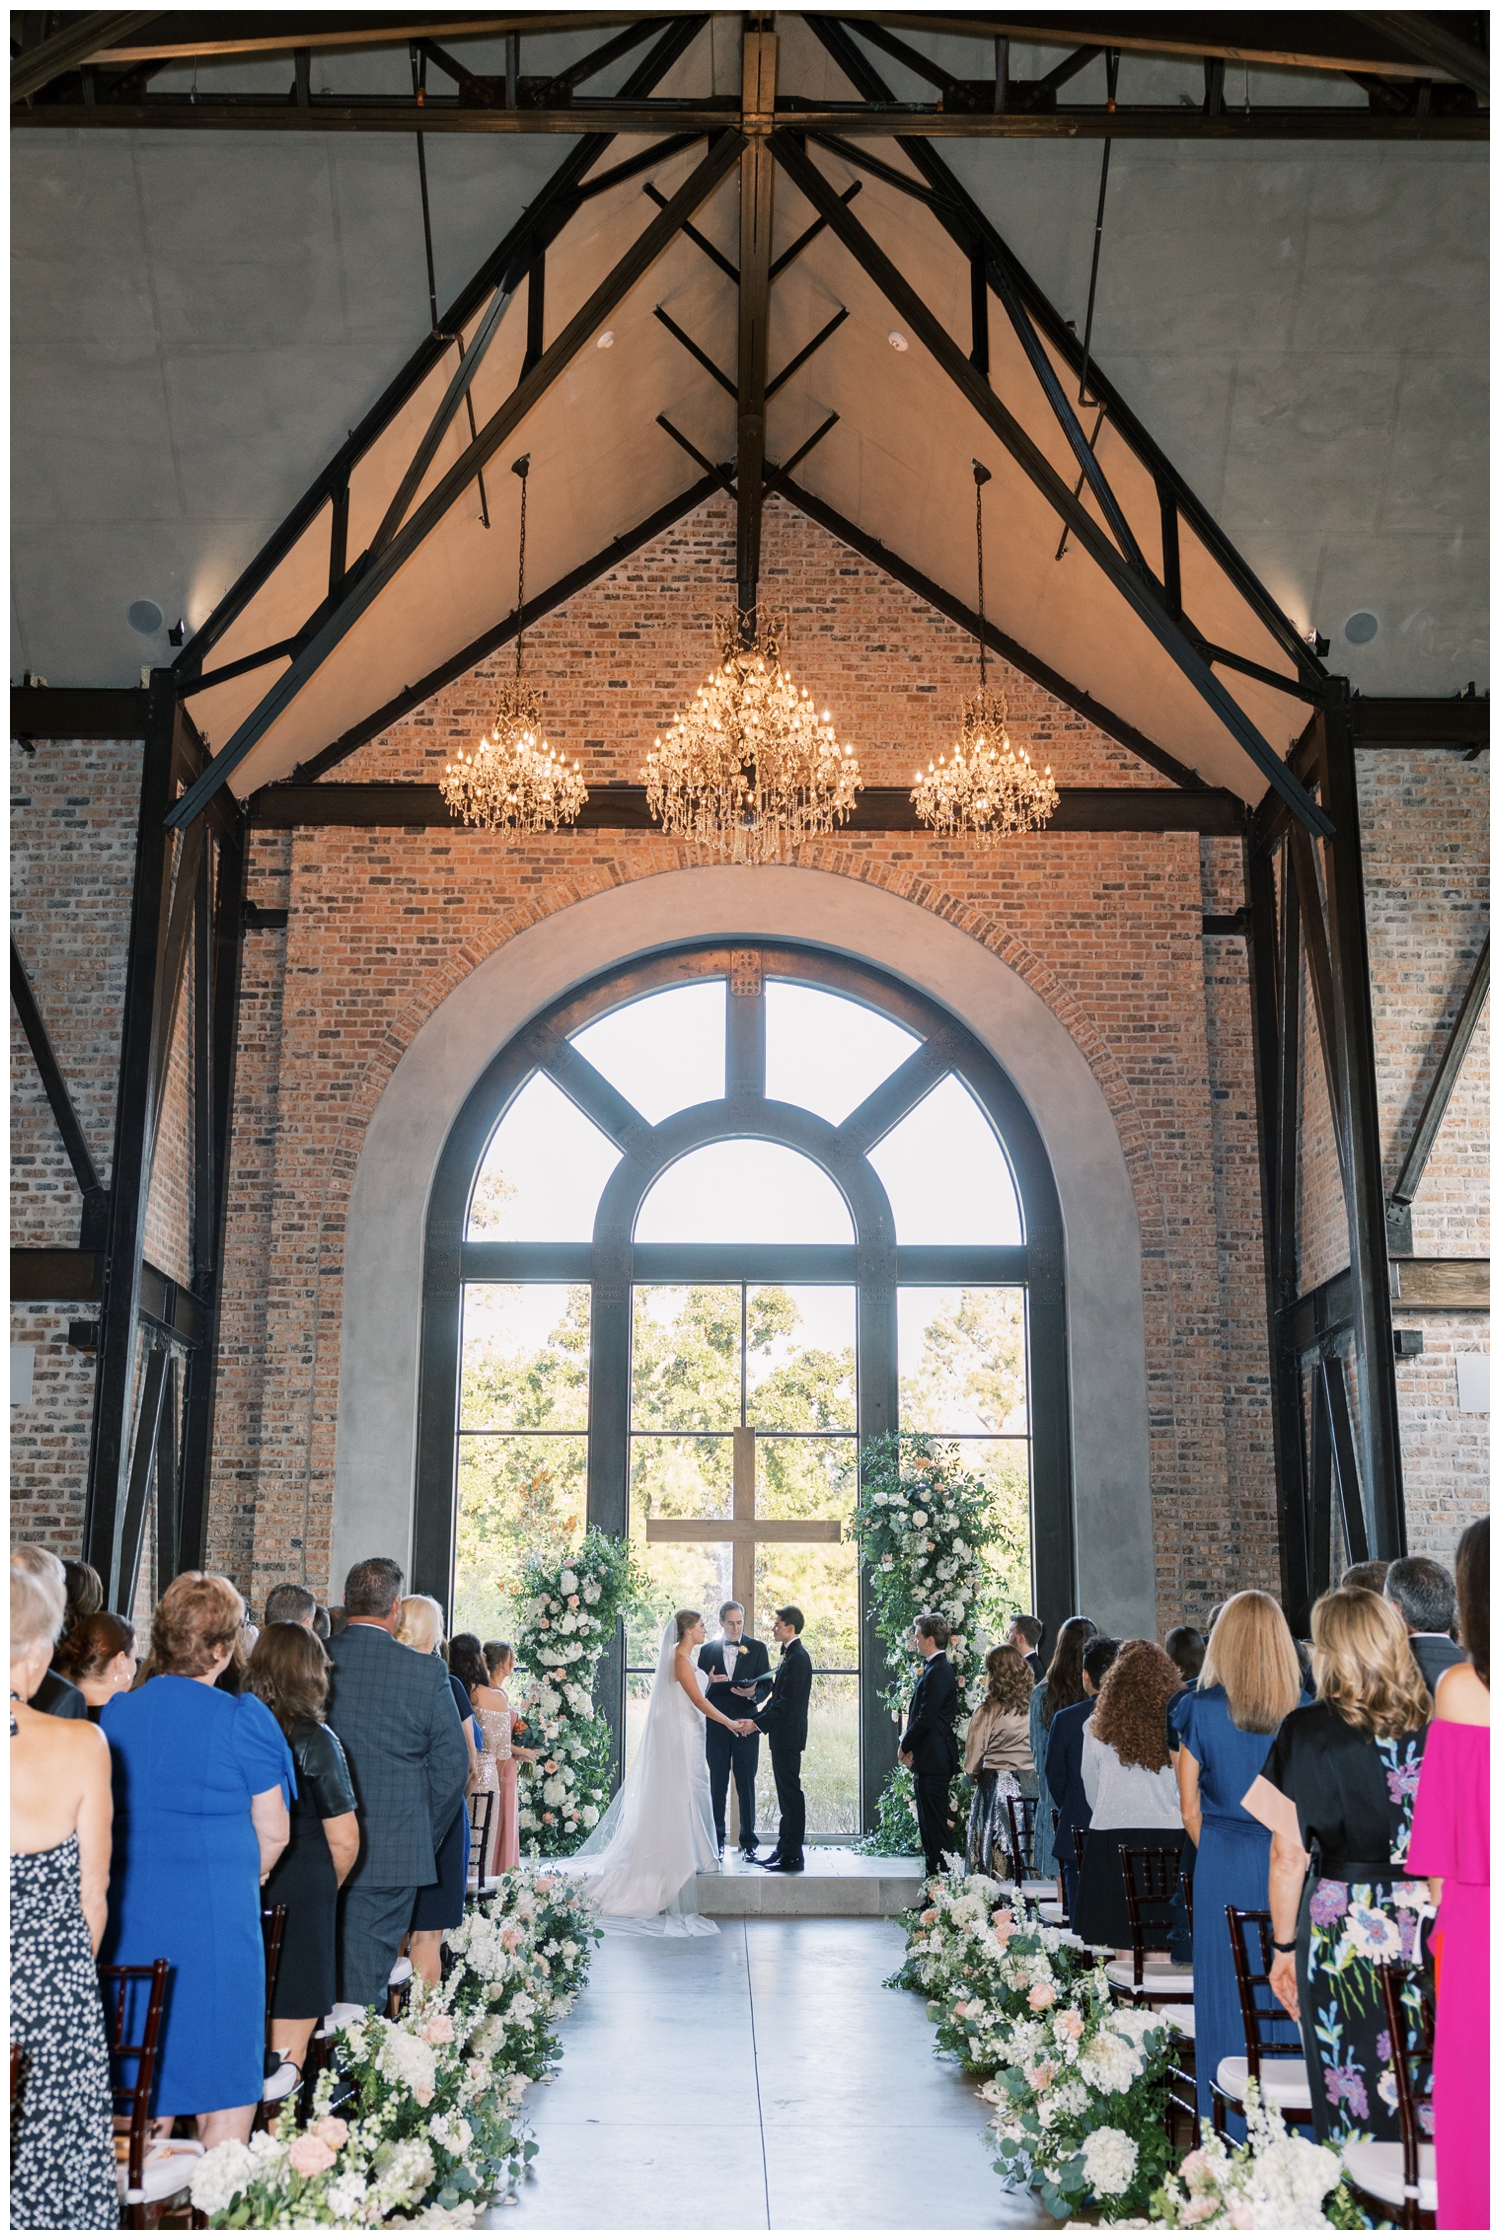 ceremony space with bride and groom in front of cross